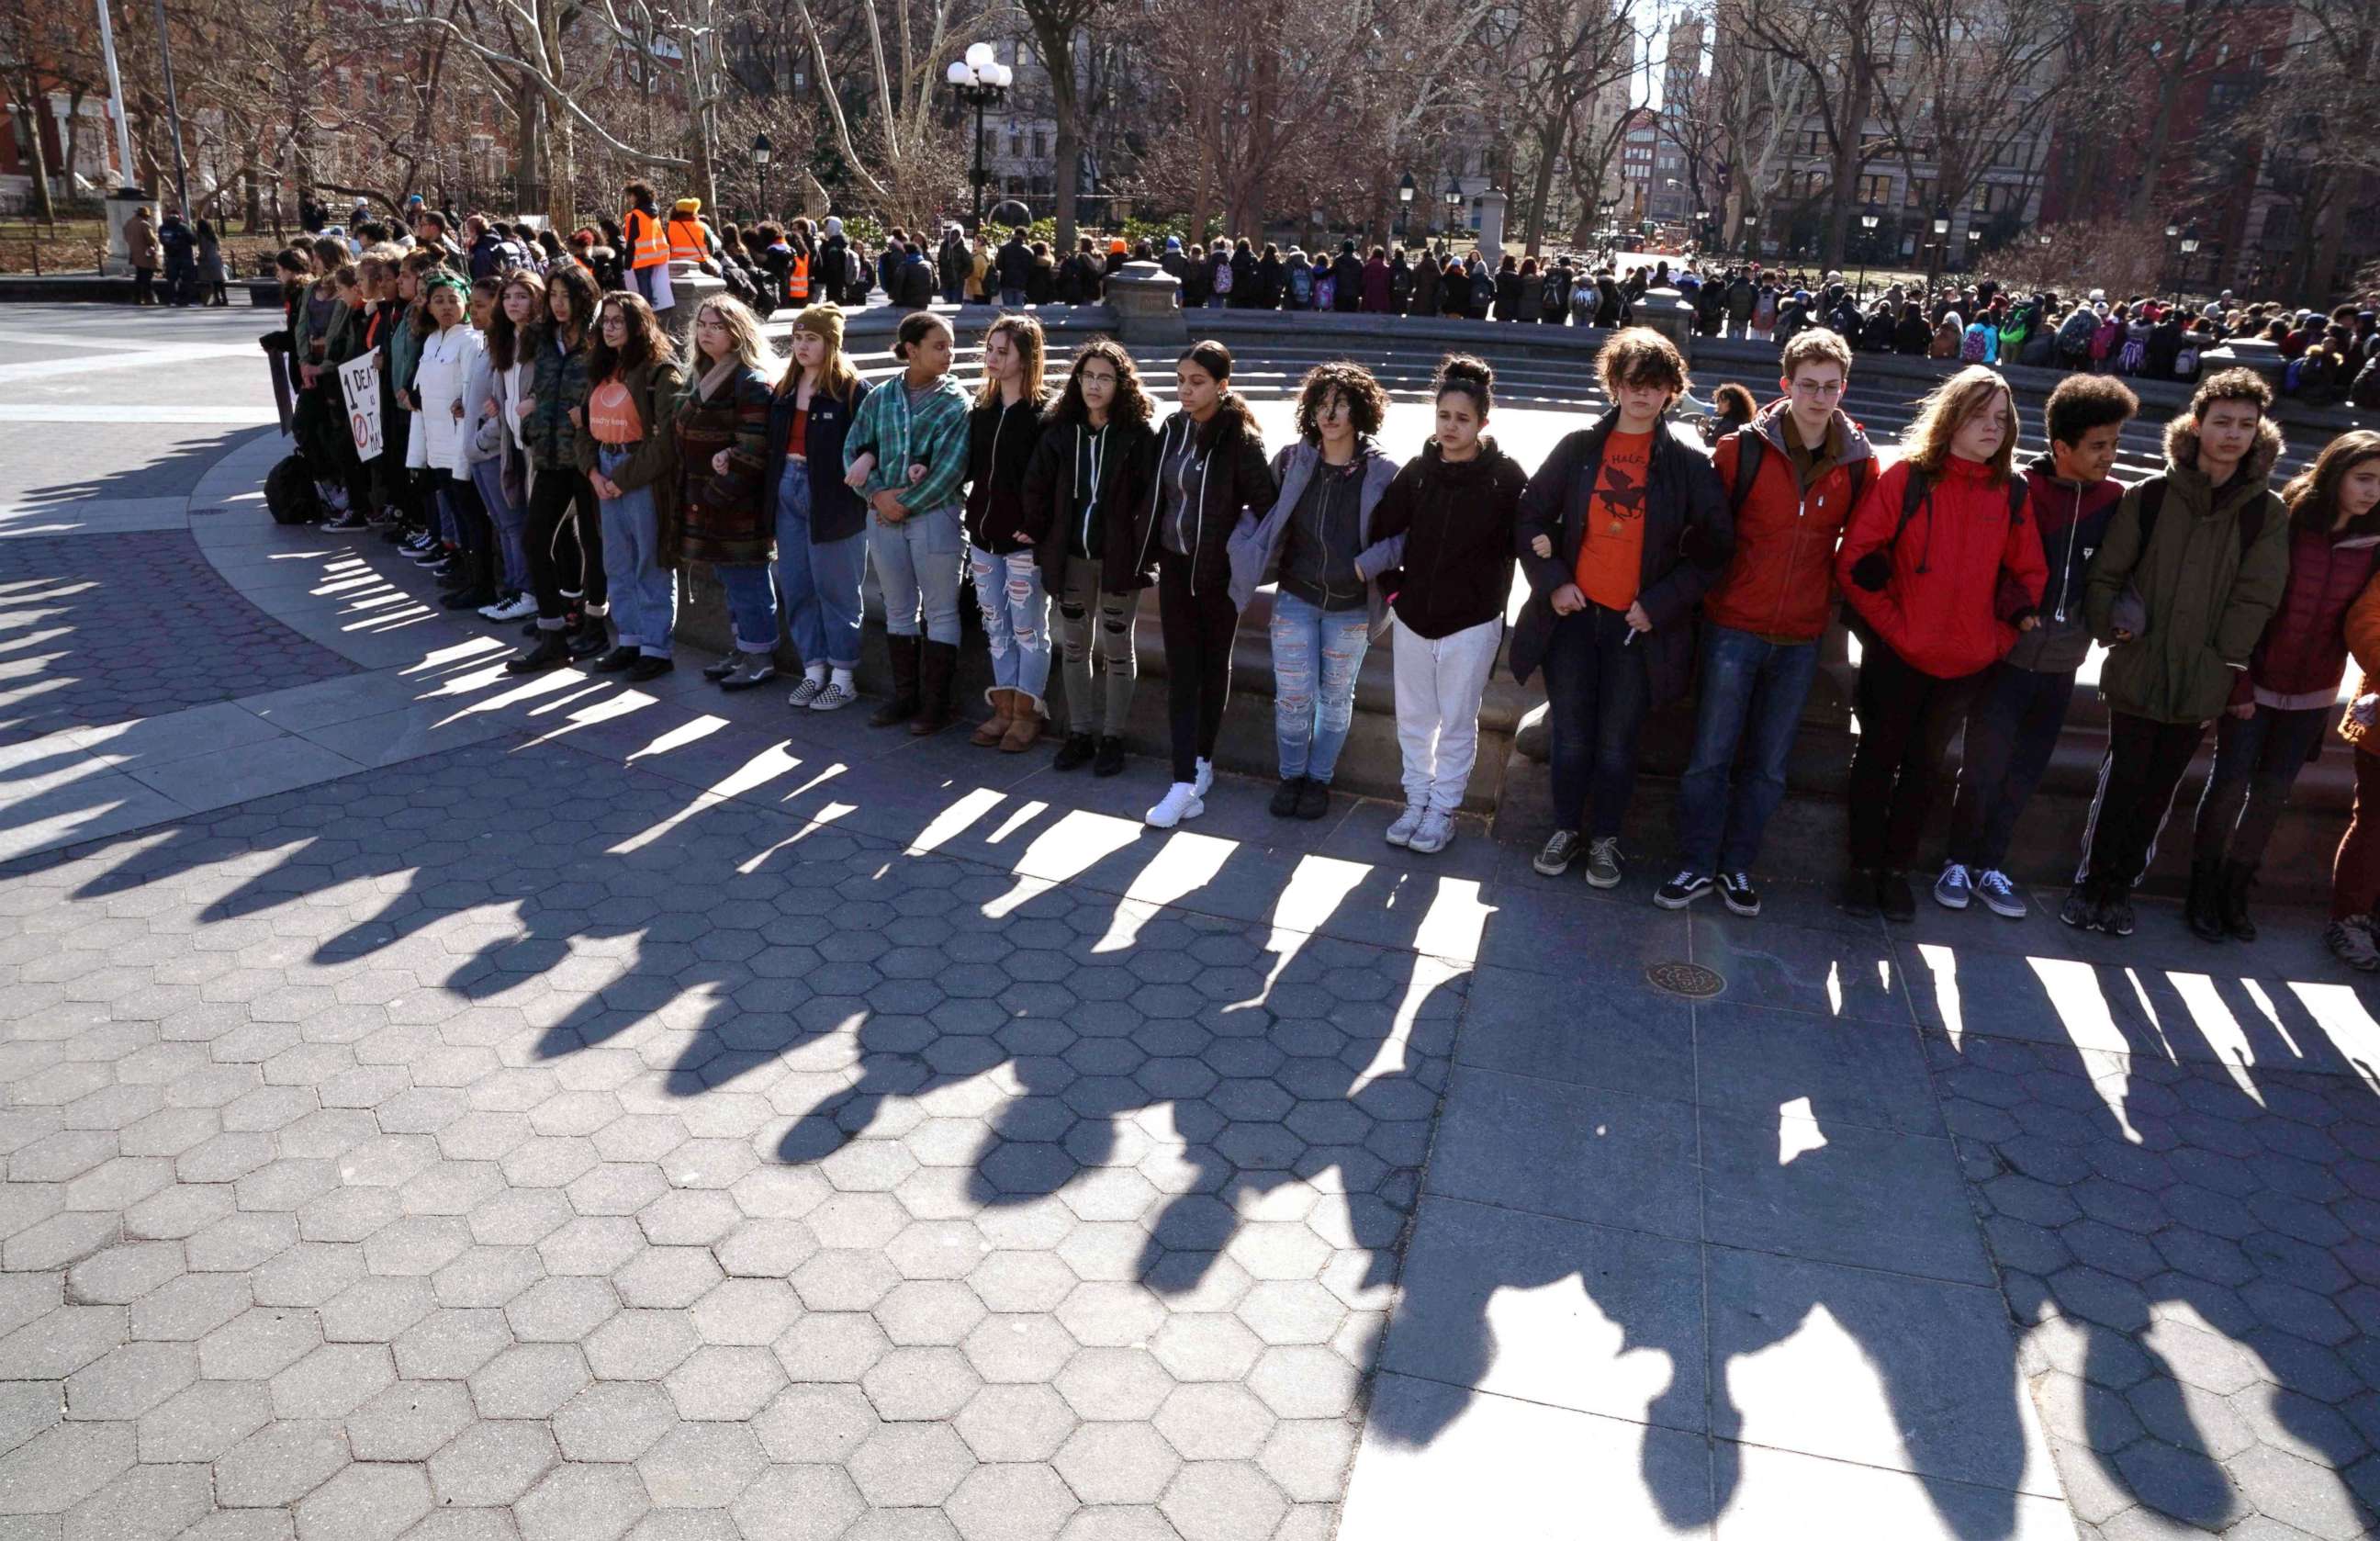 PHOTO: Students from Harvest Collegiate High School form a circle around the fountain in Washington Square Park, March 14, 2018, in N.Y. to take part in a national walkout to protest gun violence.